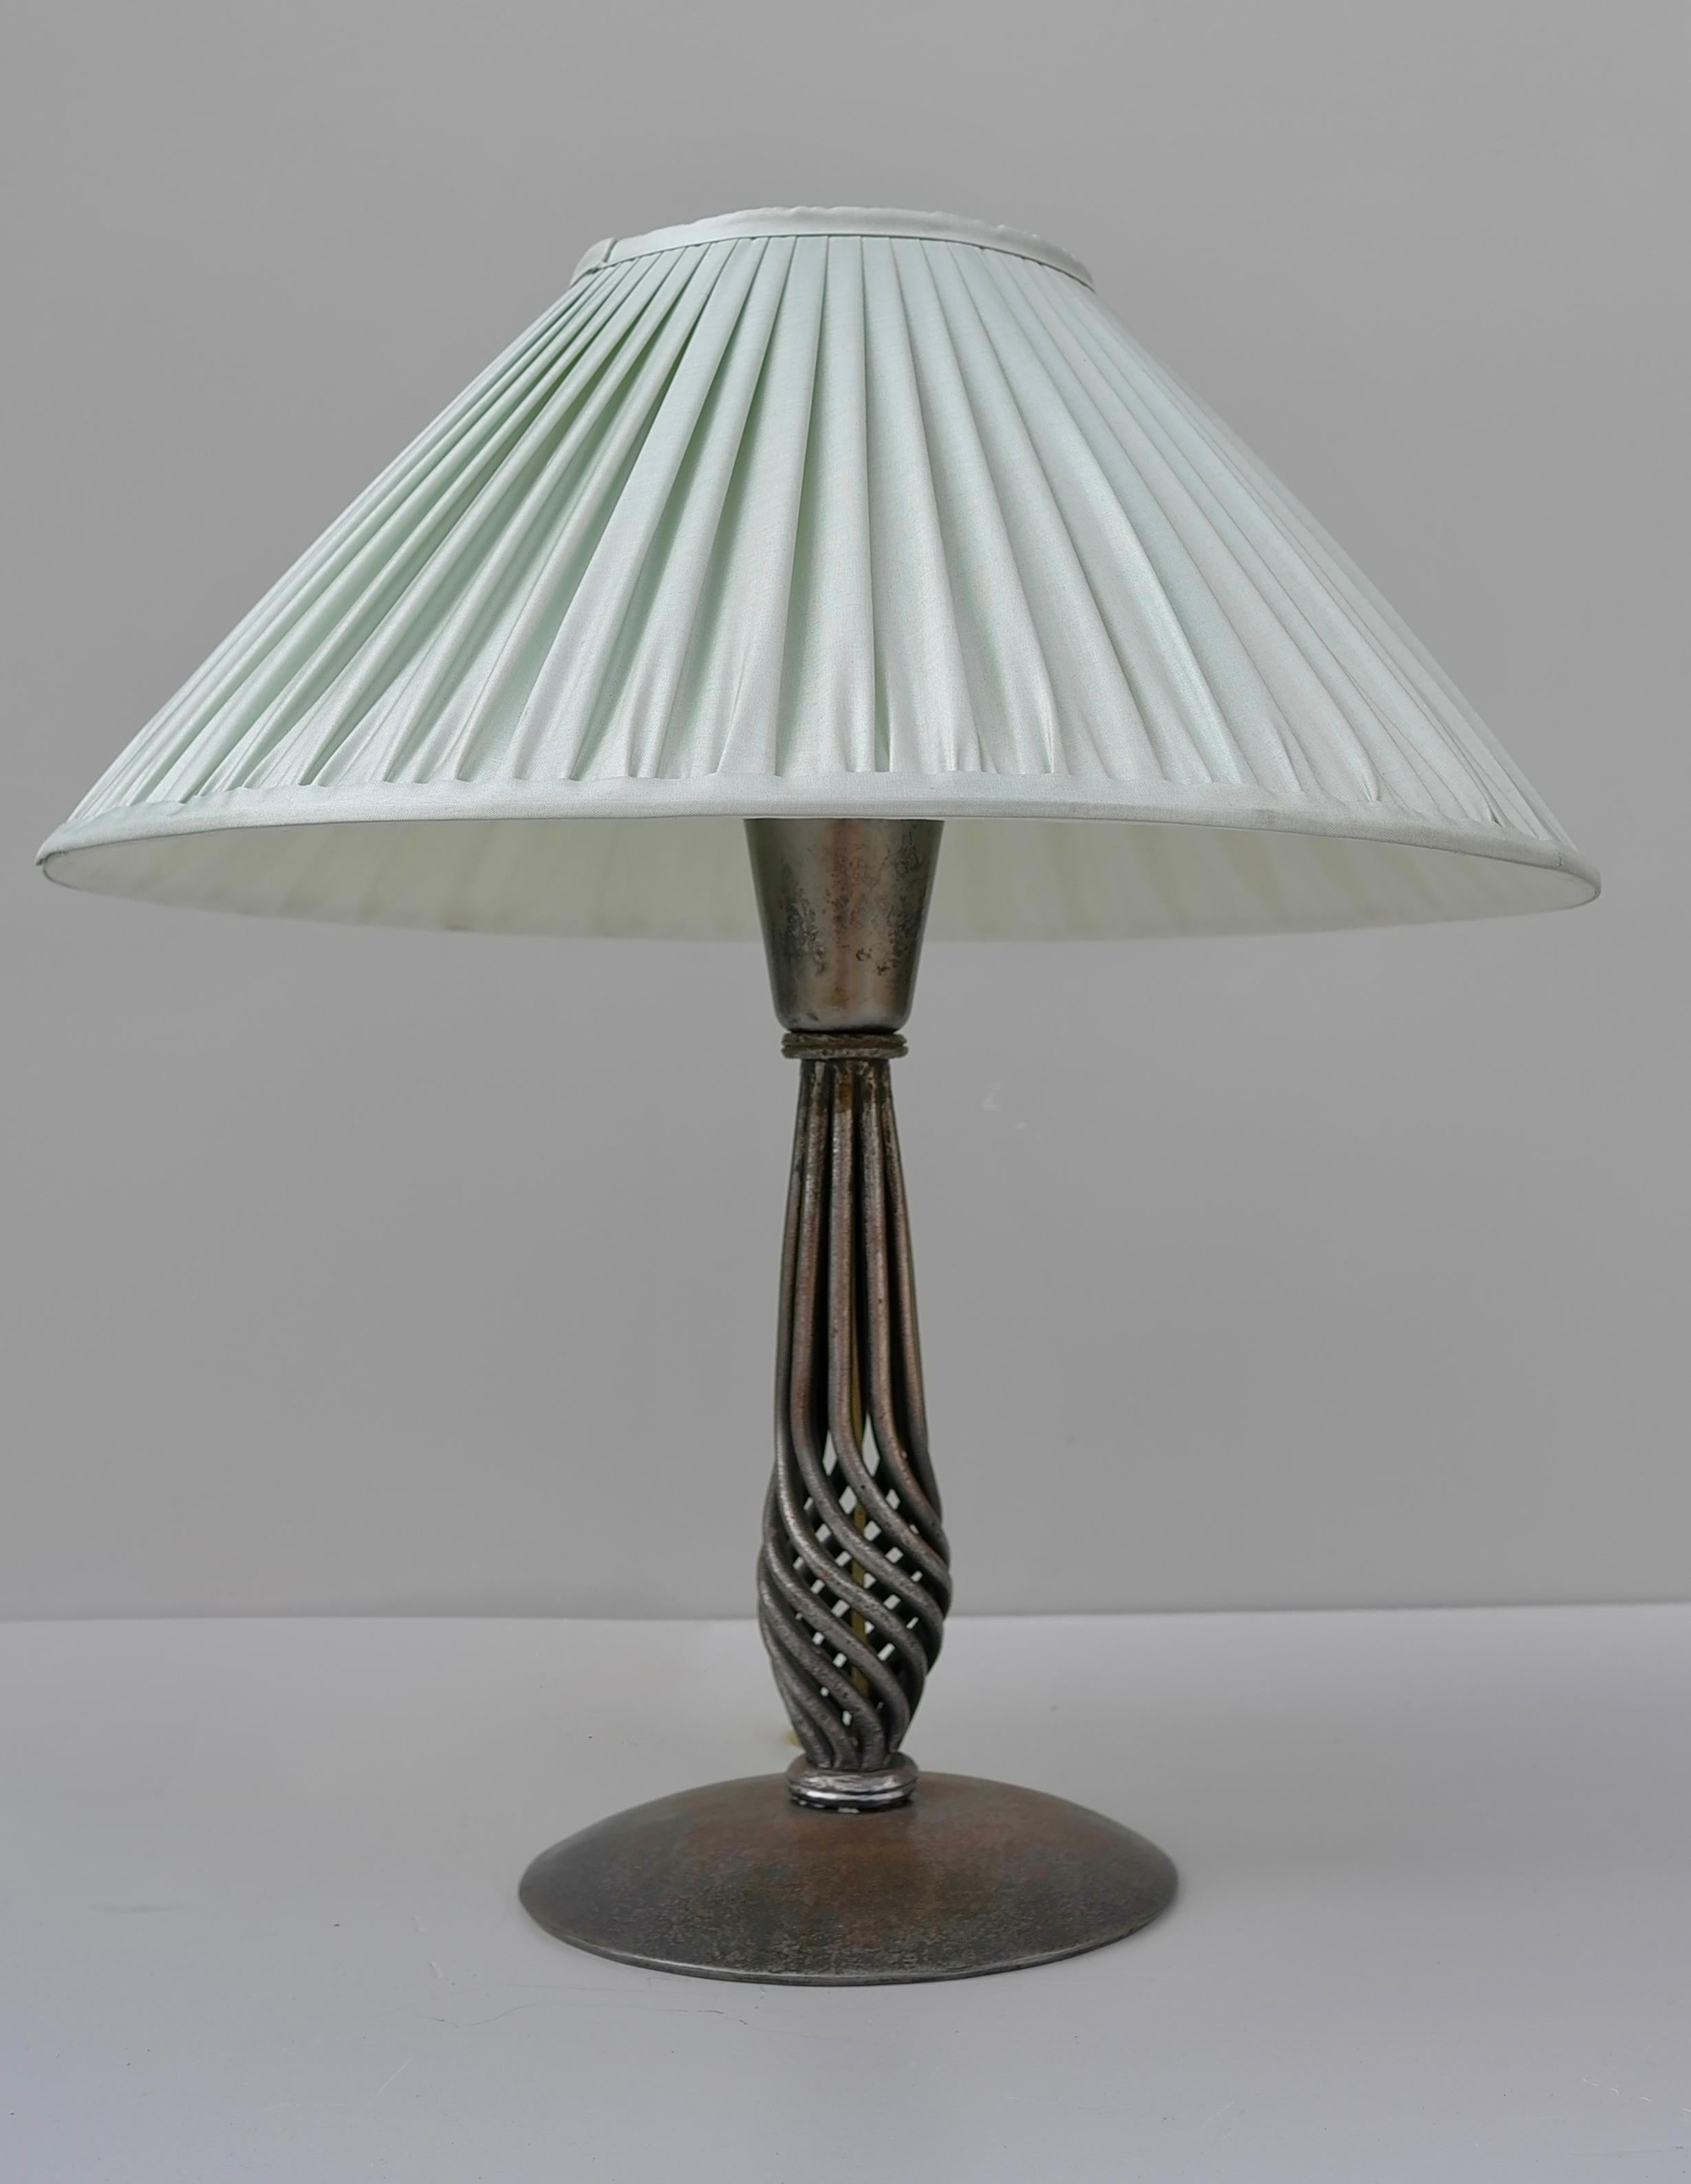 Wrought Iron Art Deco Table Lamp, France, 1930s. Ingenious turned metal base, with original shade.